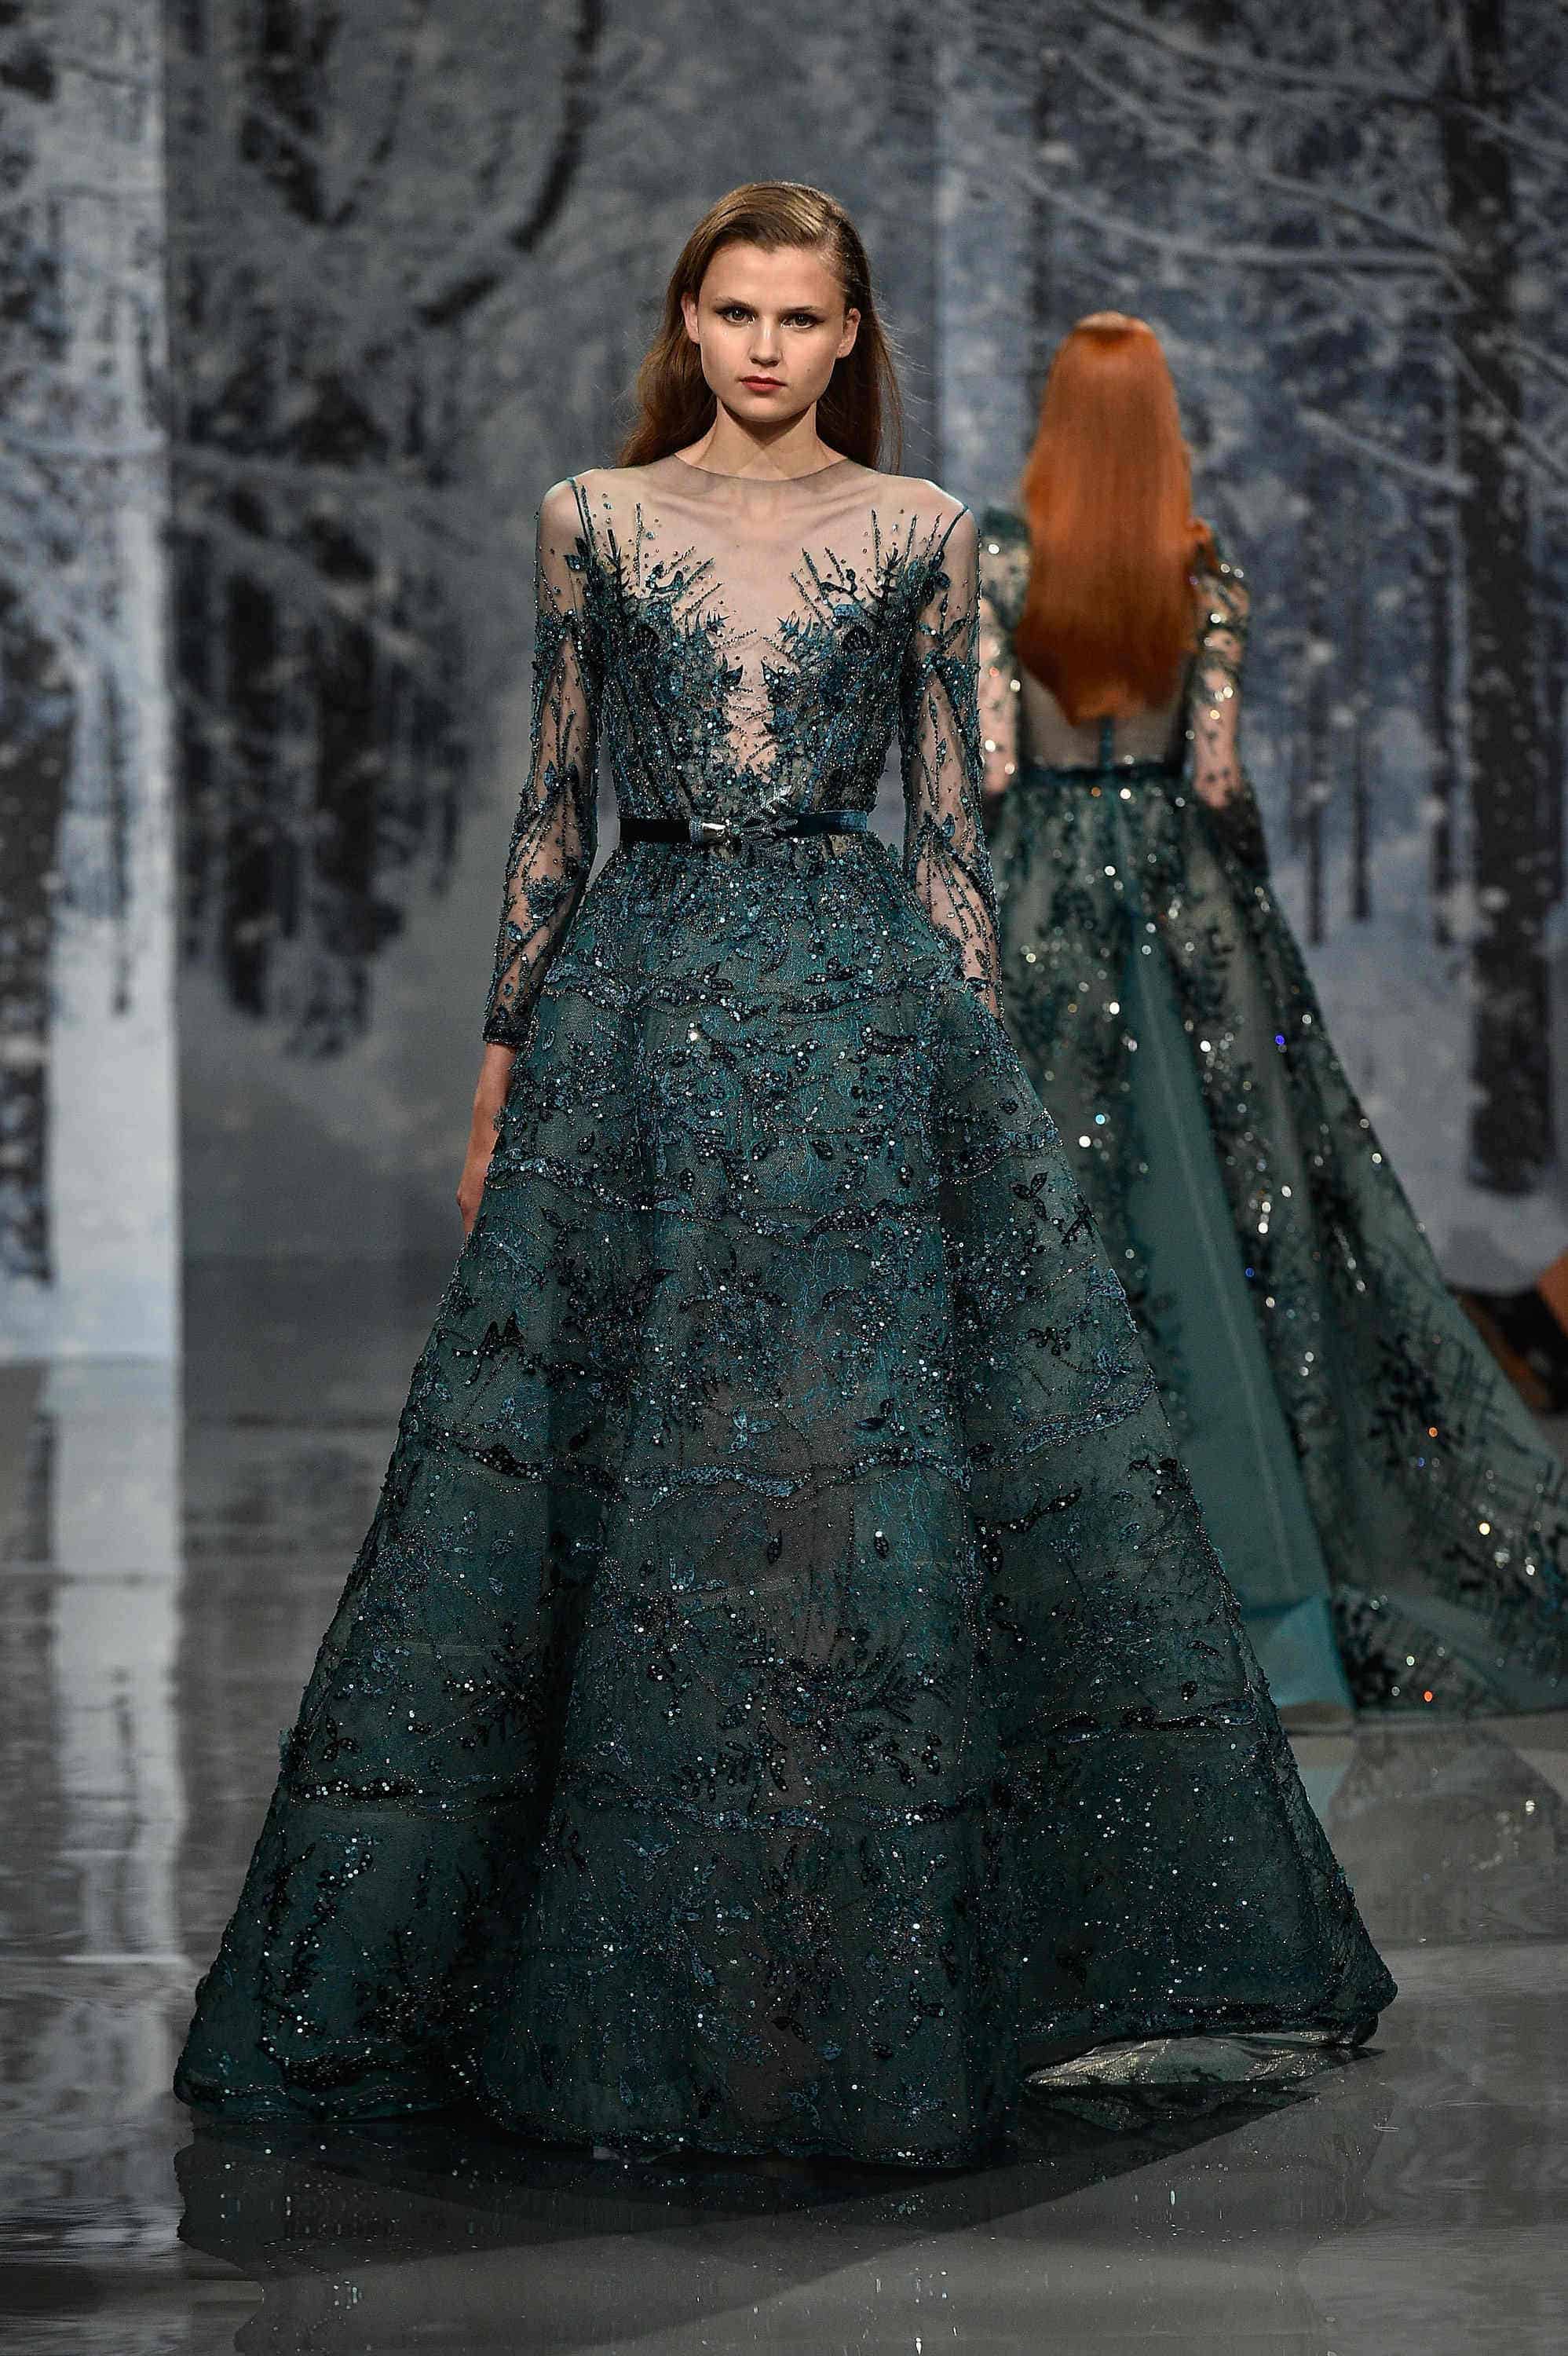 Mandatory viewing: Ziad Nakad bestows couture perfection upon us mere ...